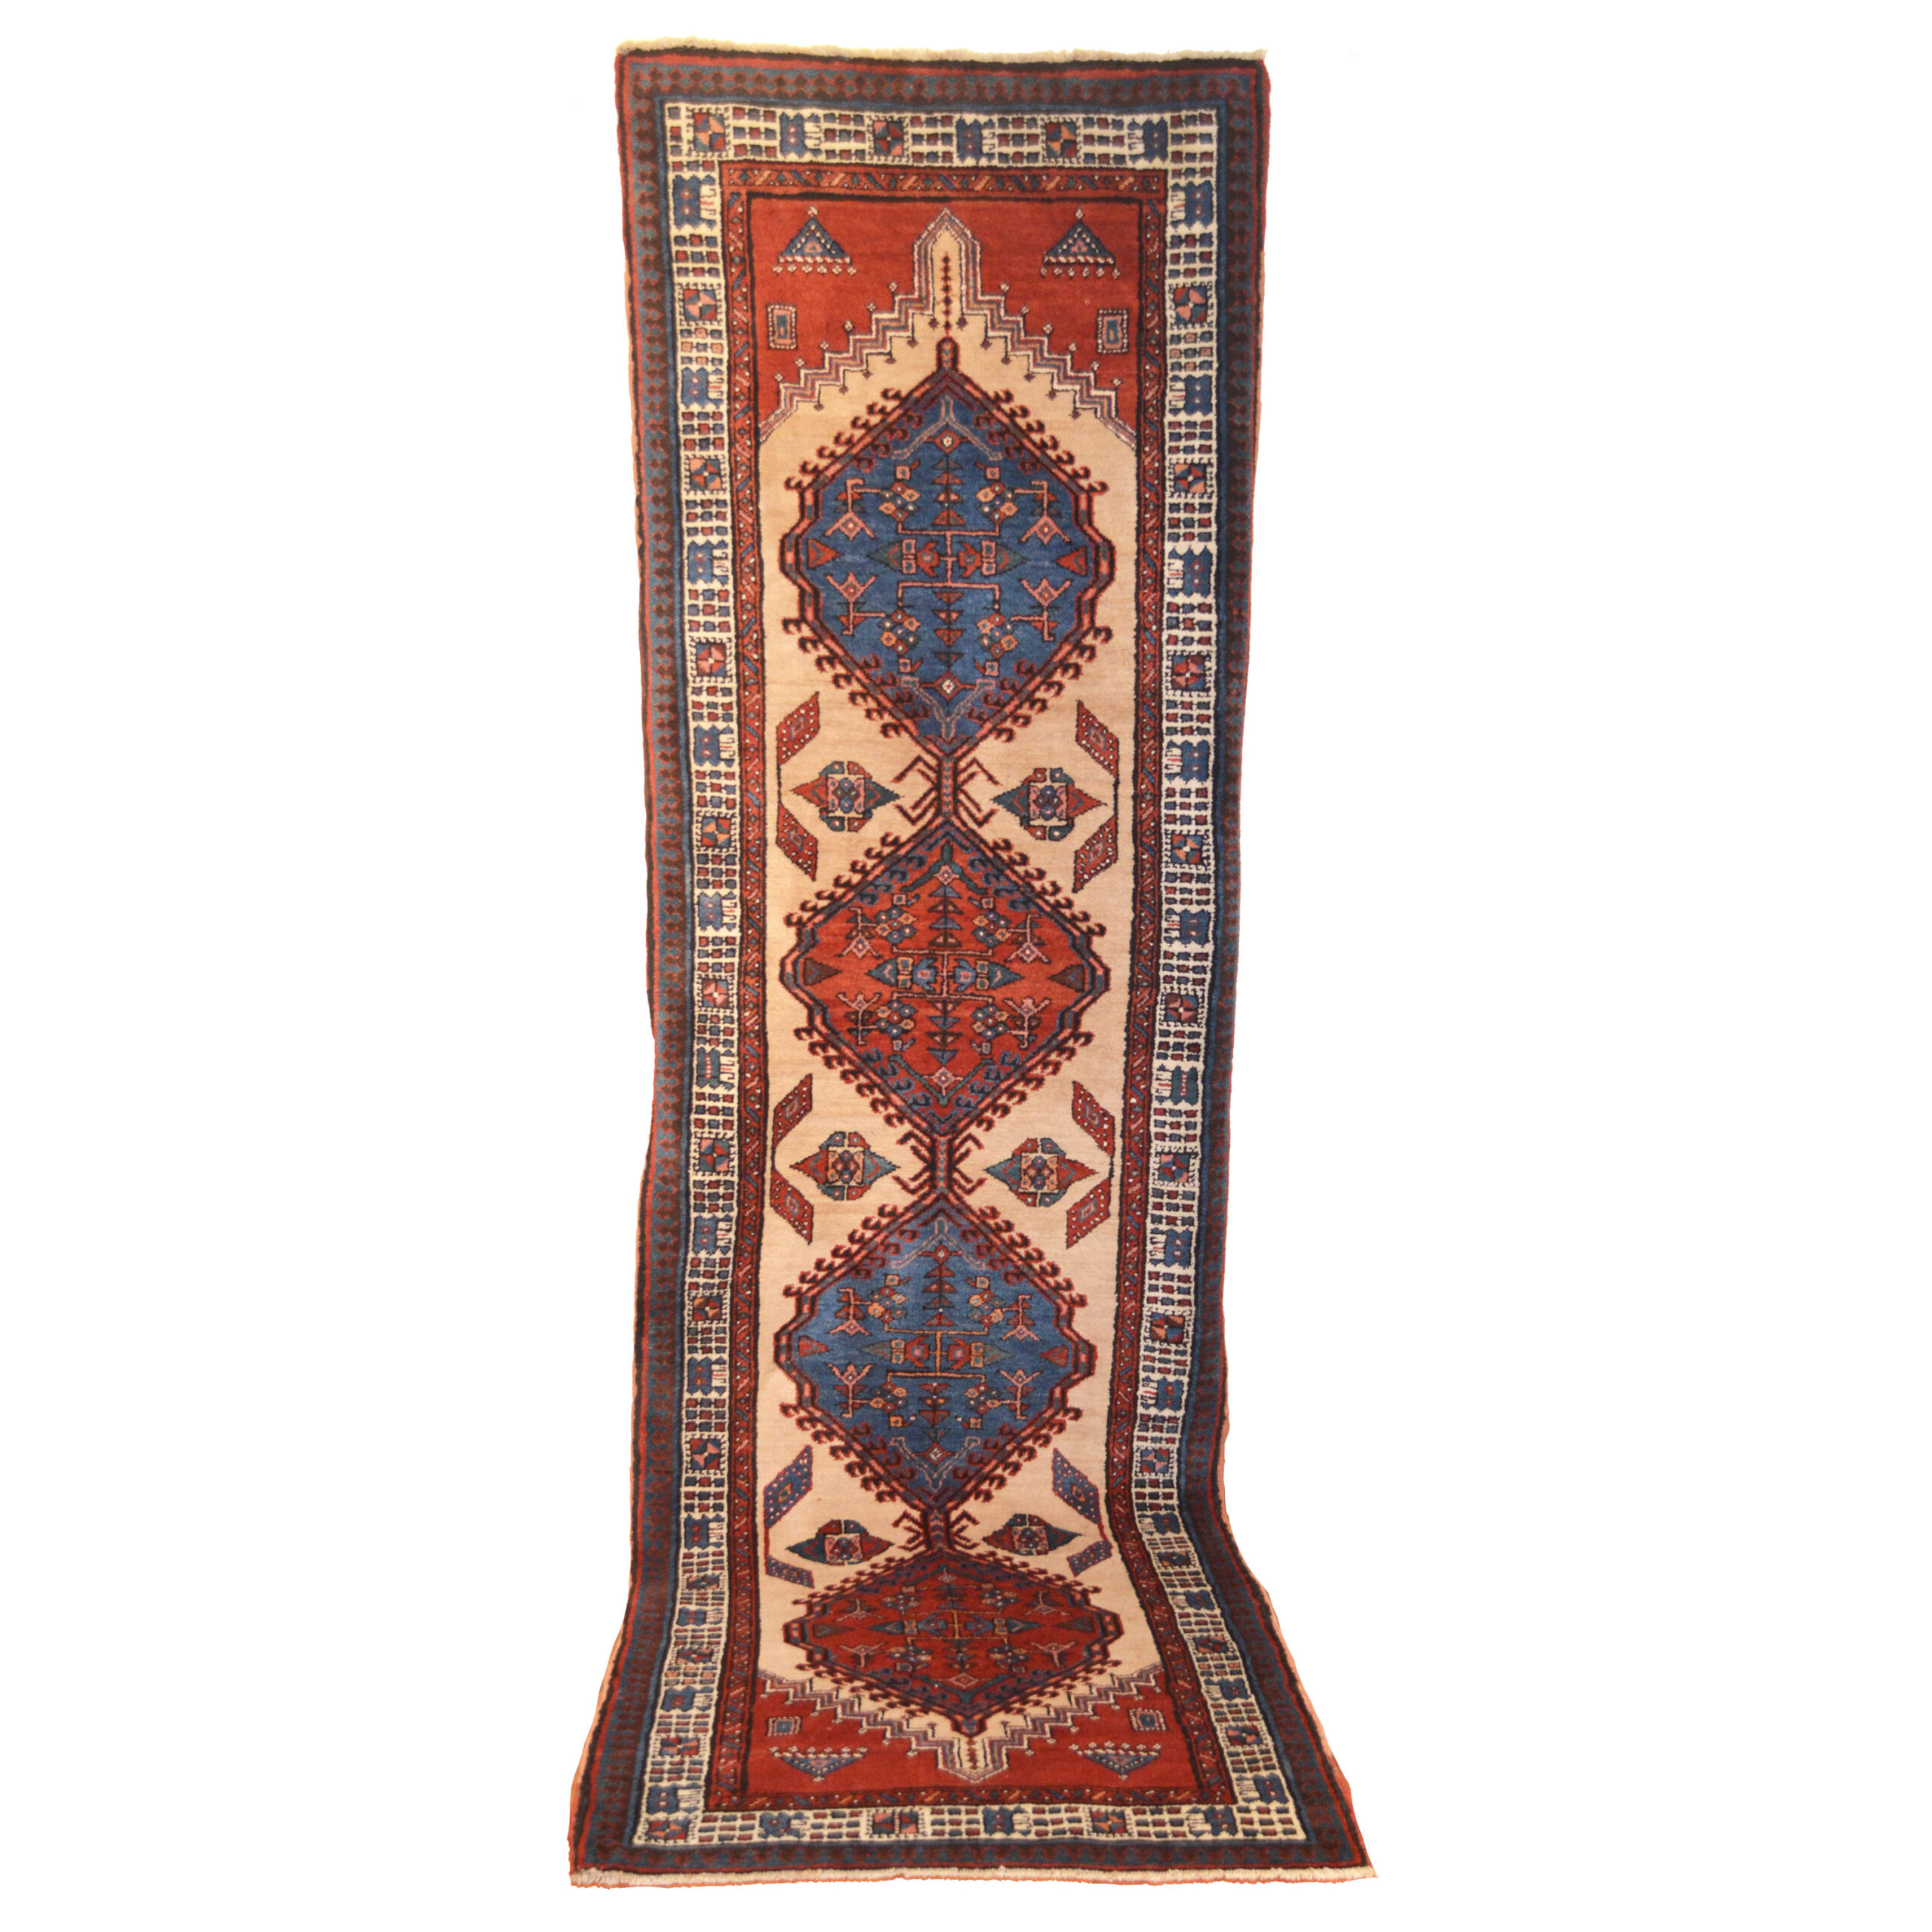 A vintage Persian Serab runner with four medallions on a light camel color field that is framed by an ivory border, circa 1930 - Douglas Stock Gallery, vintage Oriental rugs Boston,MA area New England